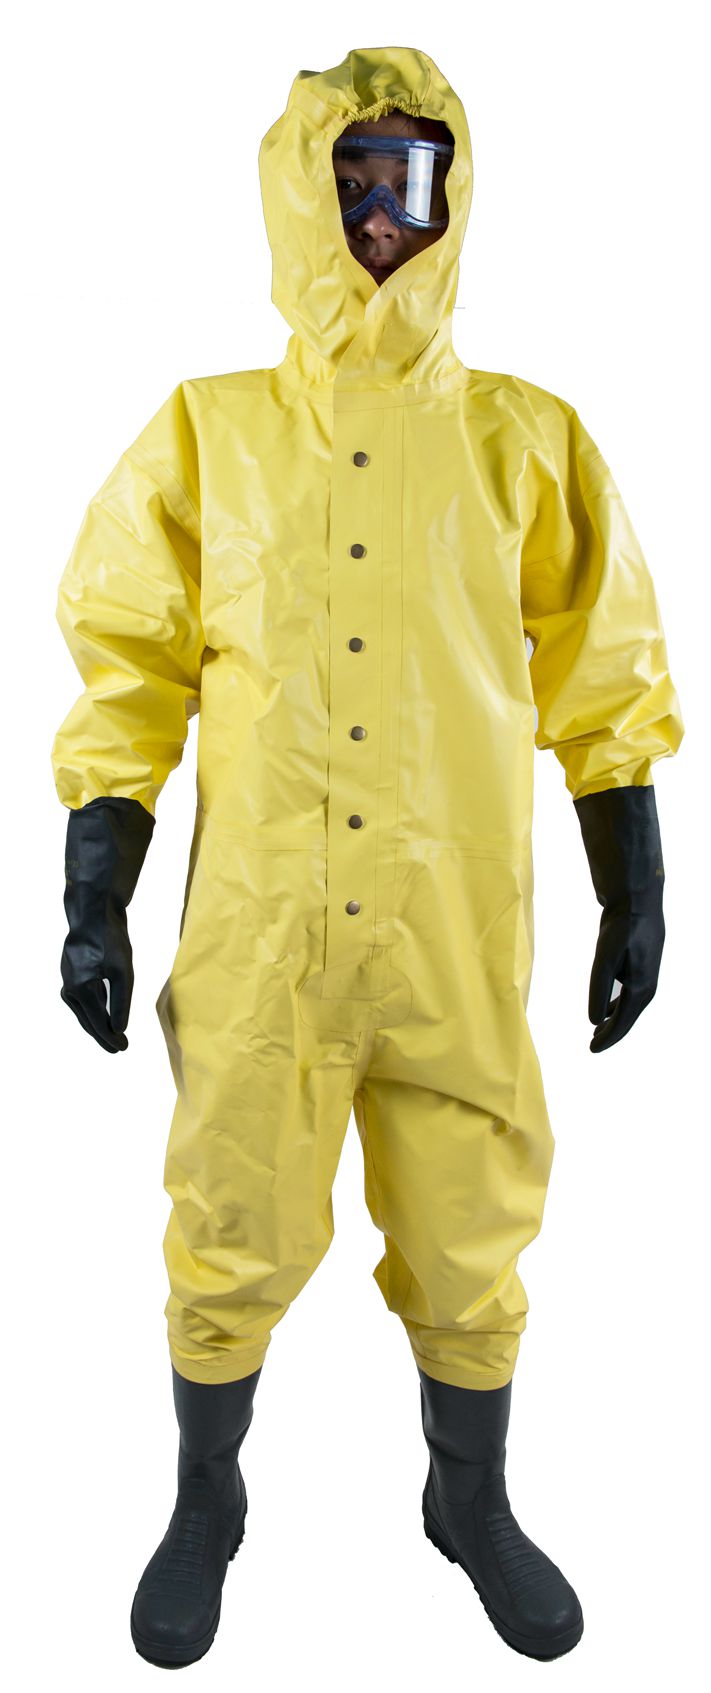 non-air -tightness type chemical protective suit-CCS